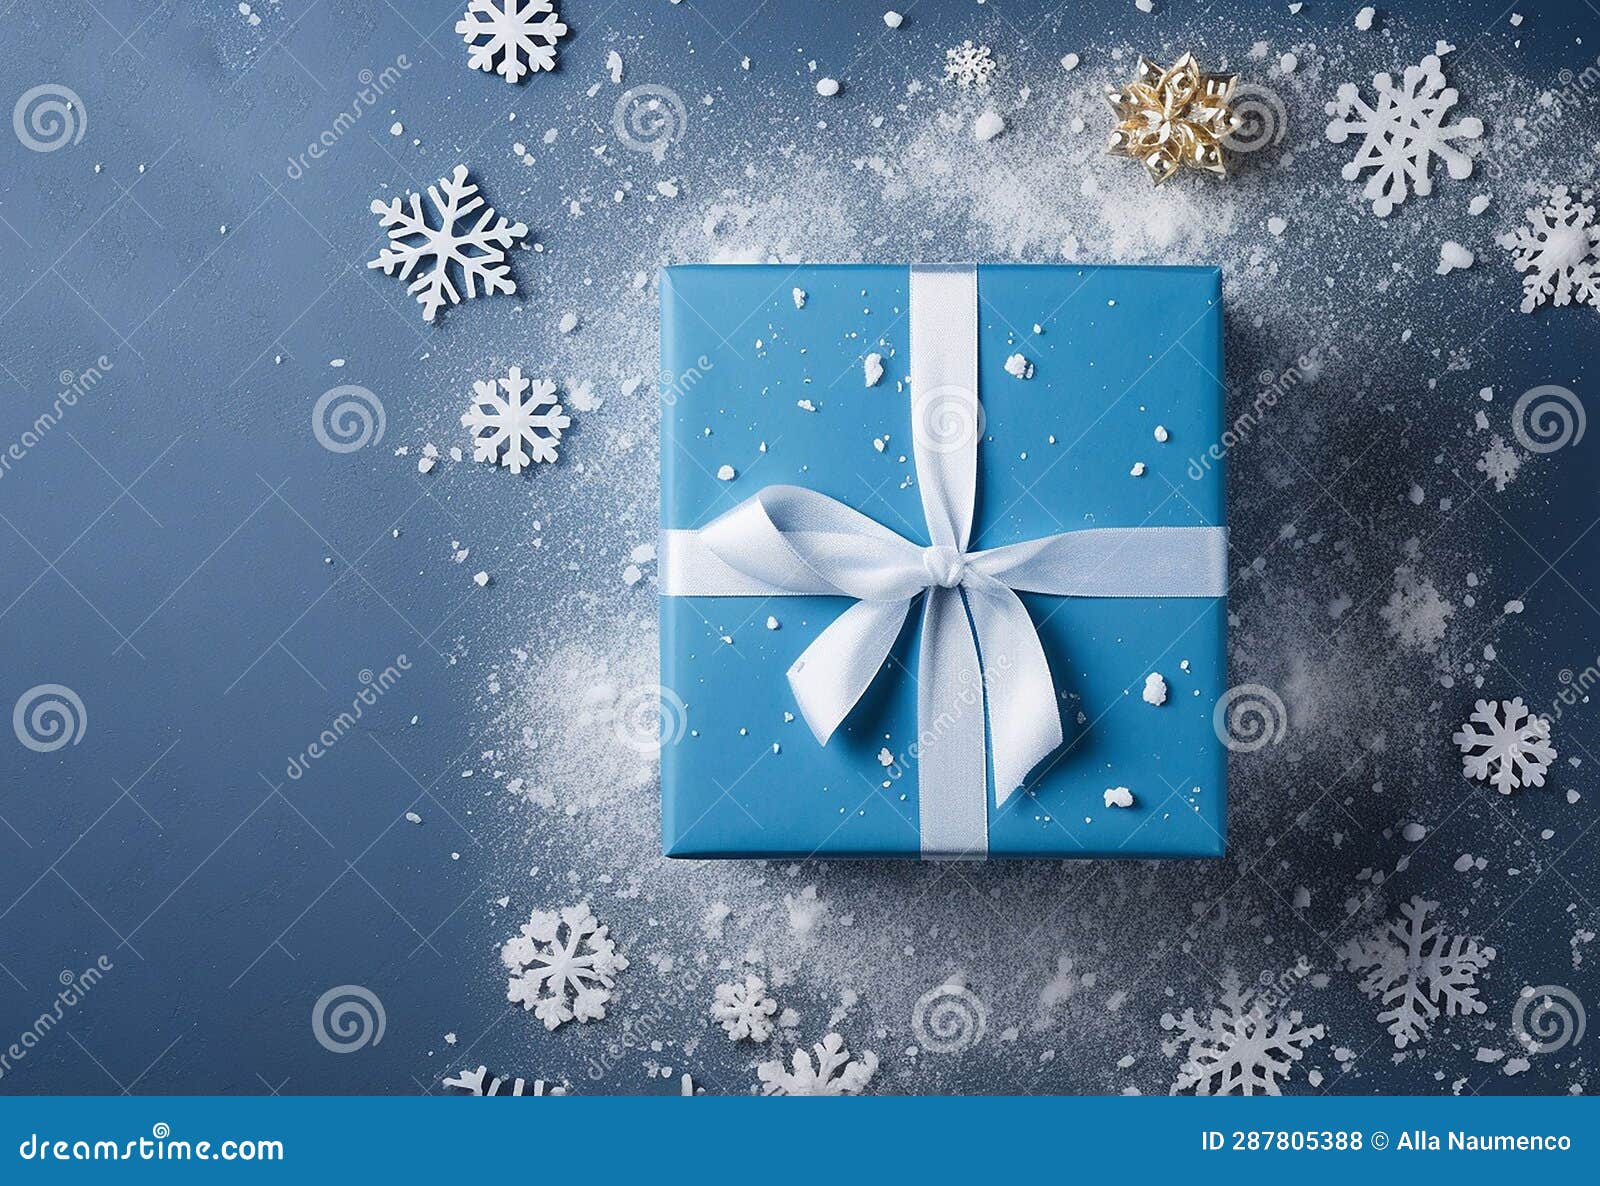 gift blue box on blue background. concetto christmas and new year. copy space